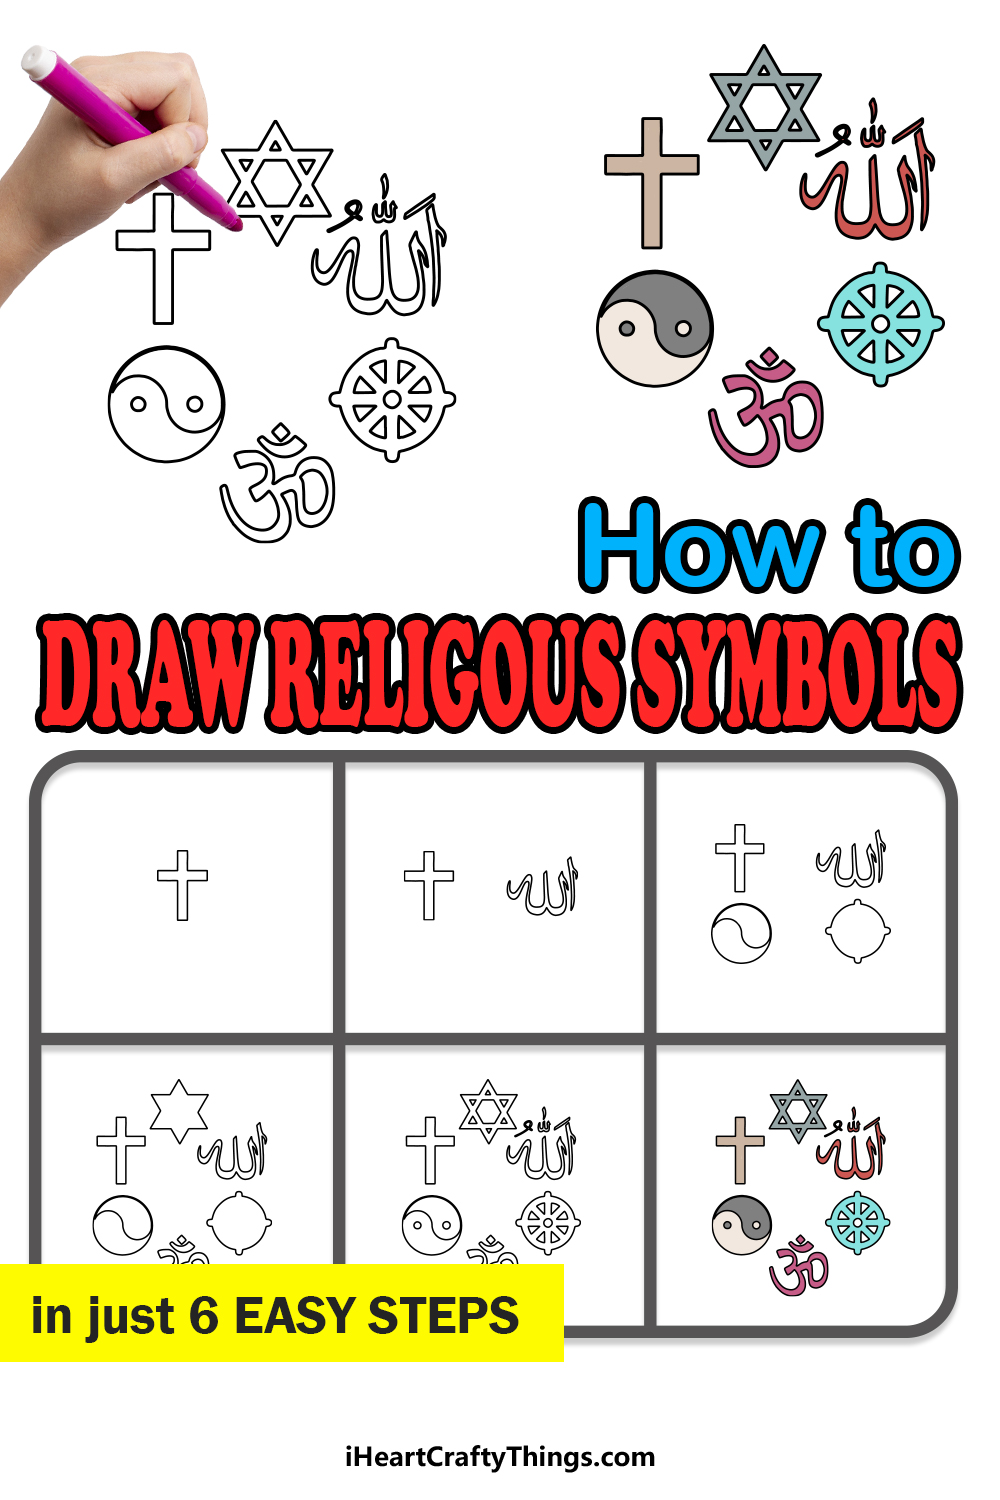 How to Draw Religious Symbols in 6 easy steps